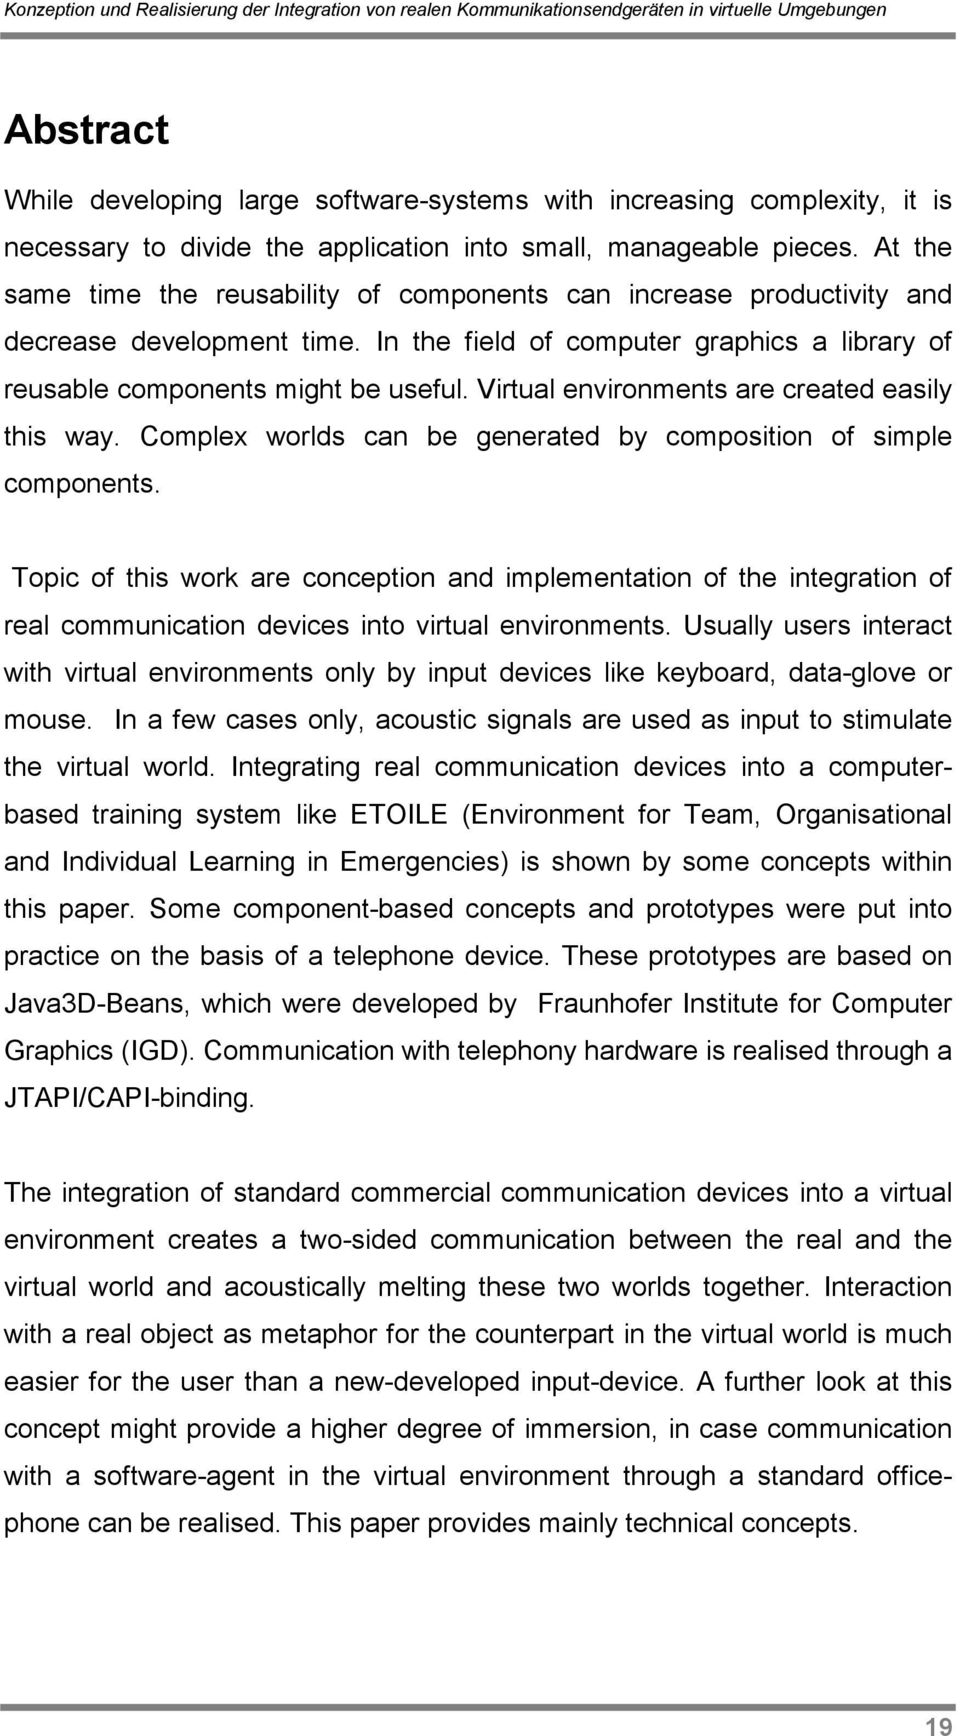 Virtual environments are created easily this way. Complex worlds can be generated by composition of simple components.